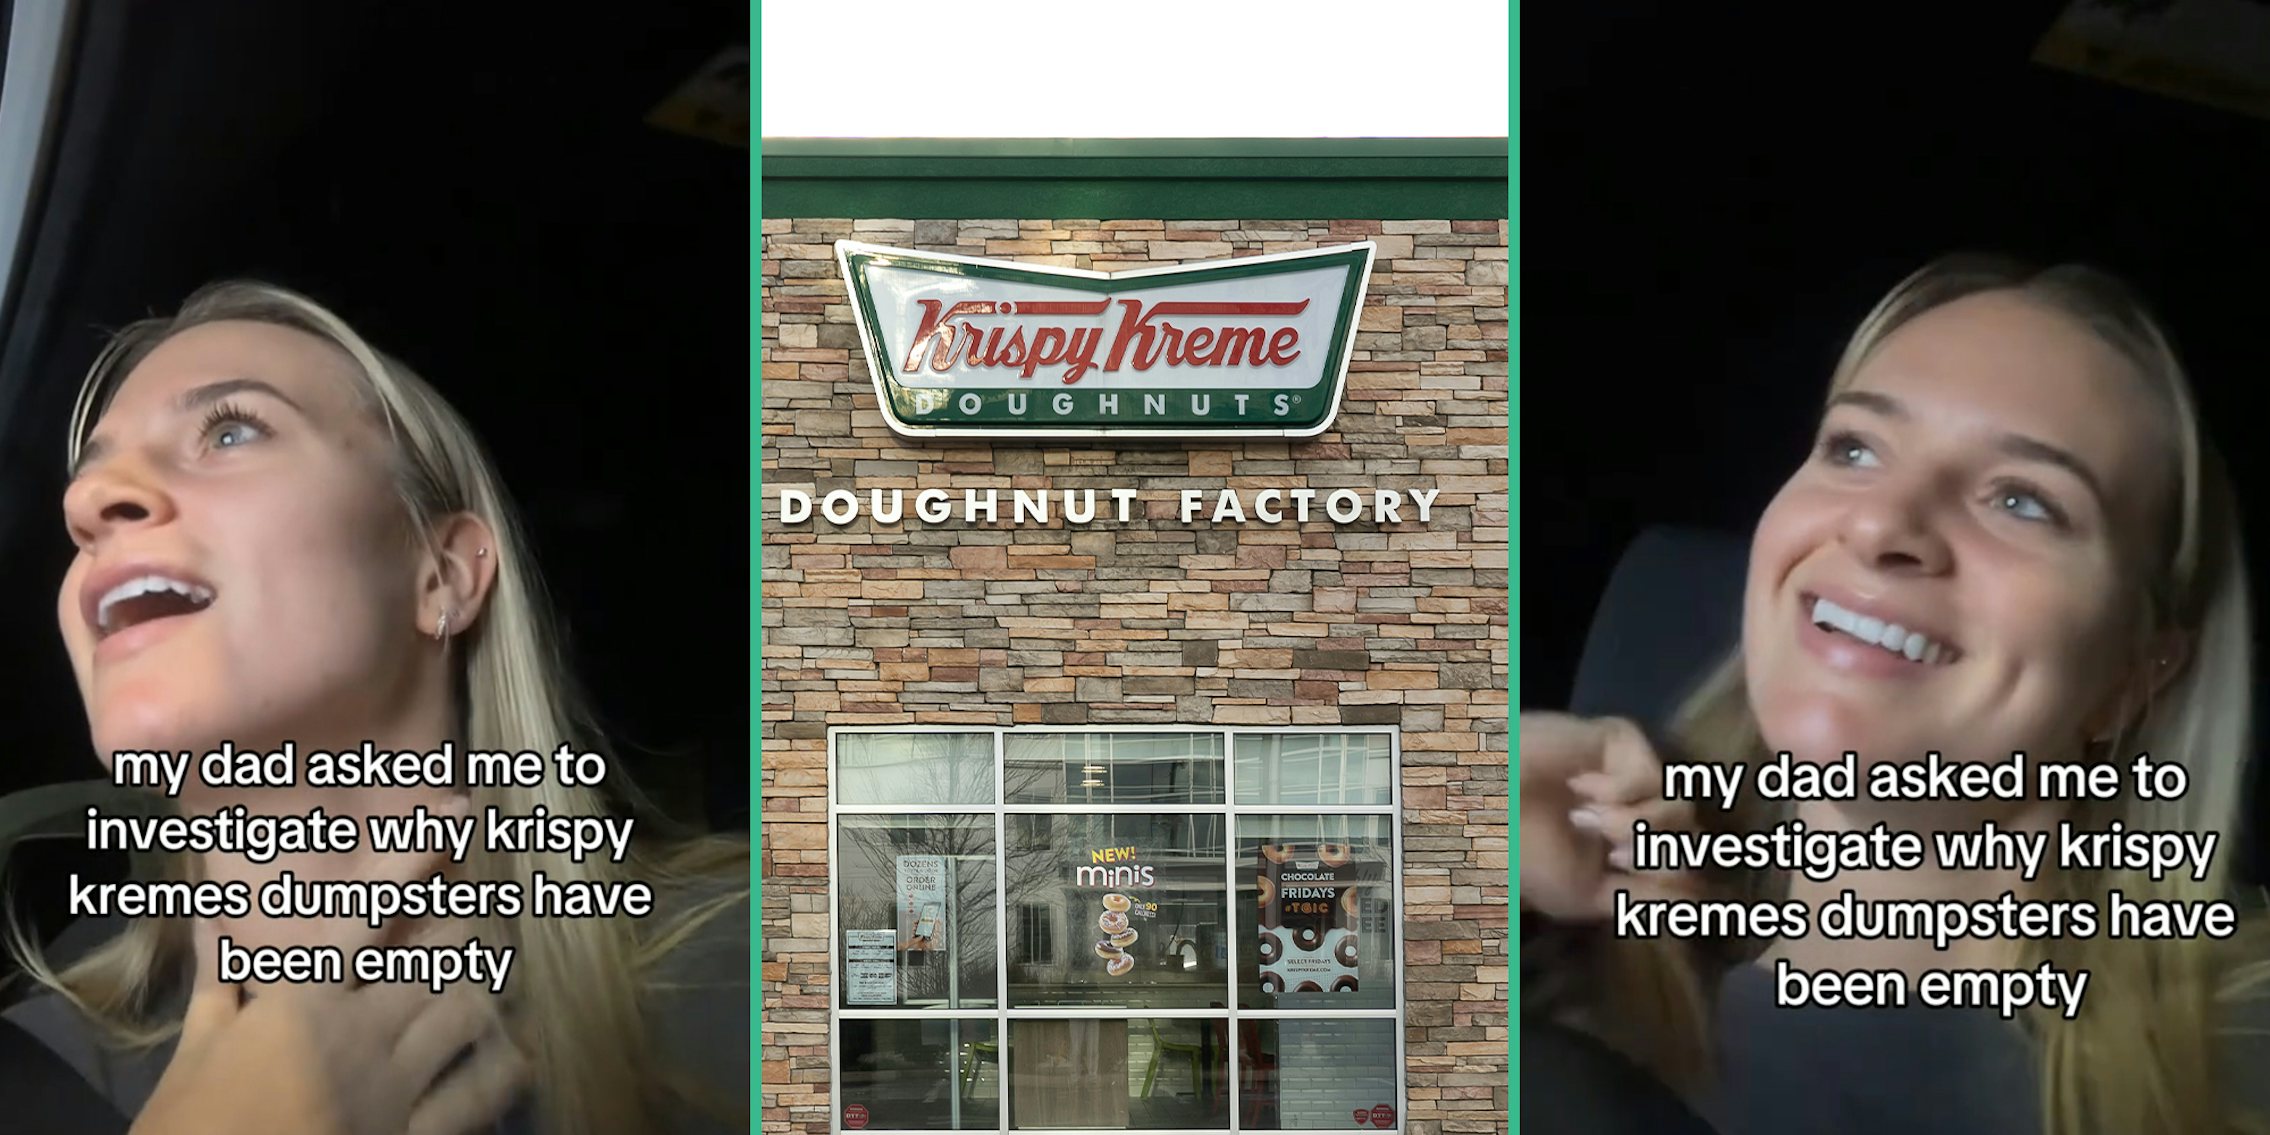 Customer Questions Why Kreme Dumpster Is Empty